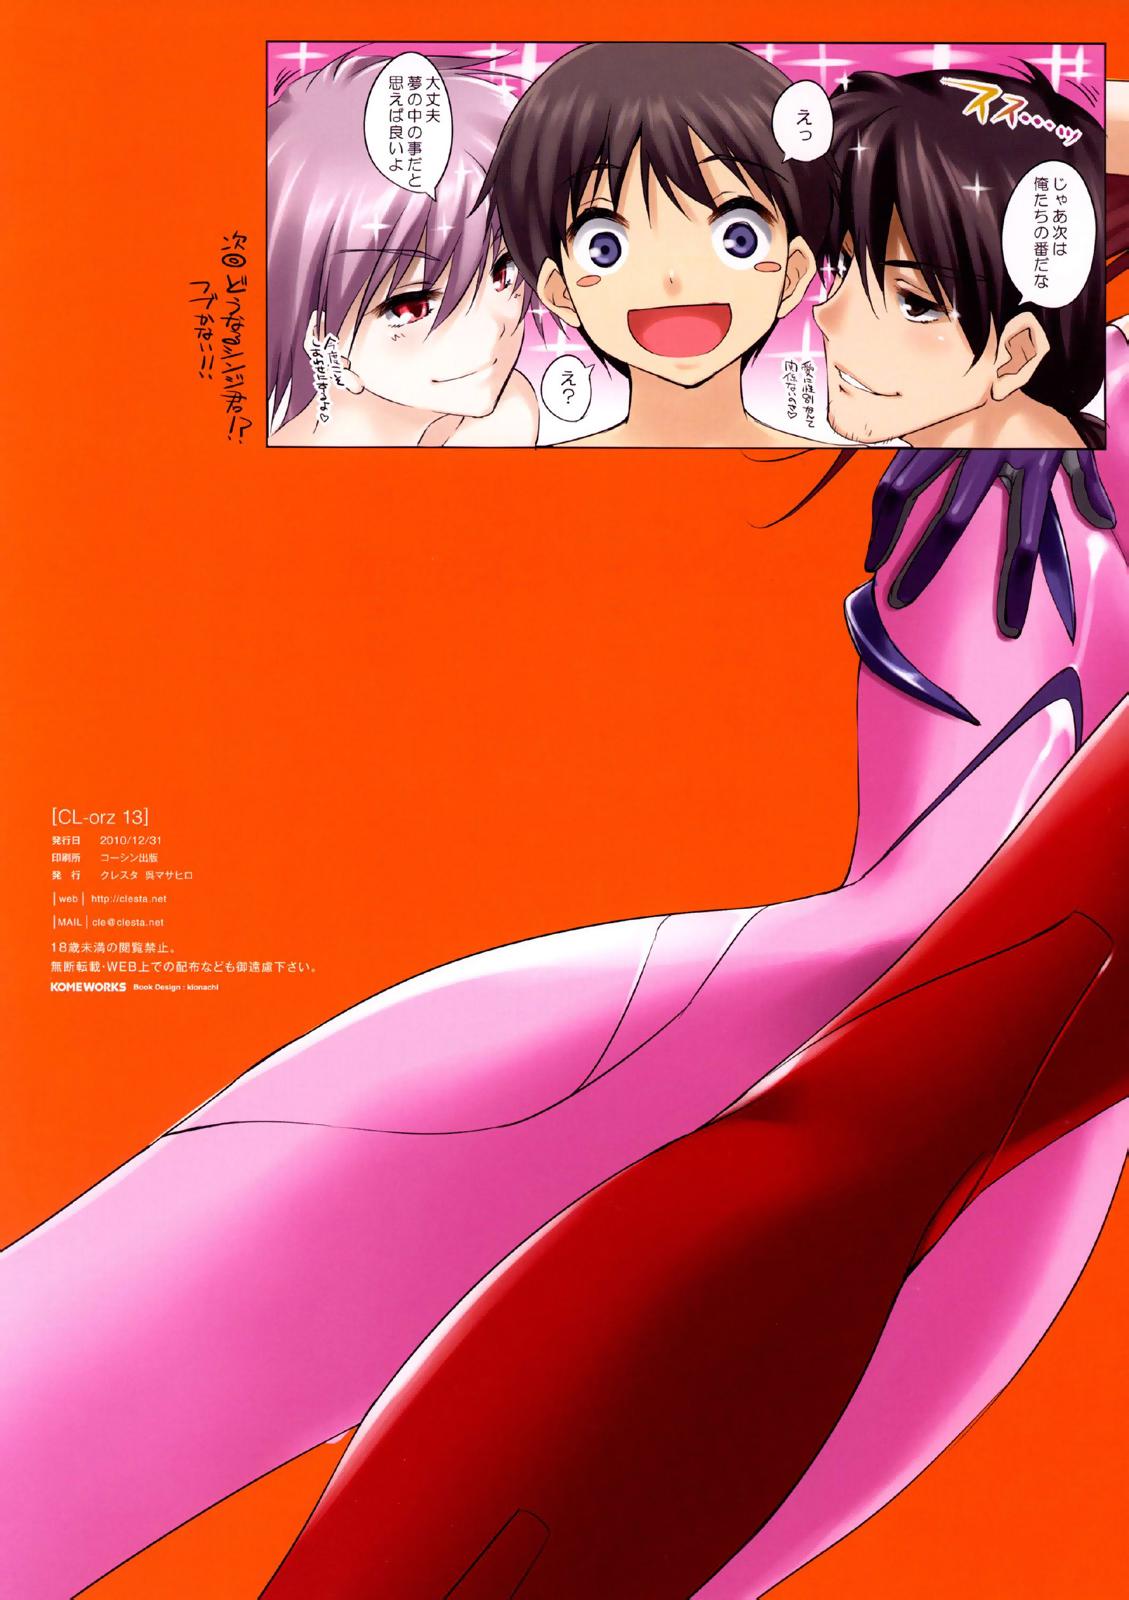 (C79) [Clesta (Cle Masahiro)] CL-orz 13 you can (not) advance. (Rebuild of Evangelion) [Decensored] 14